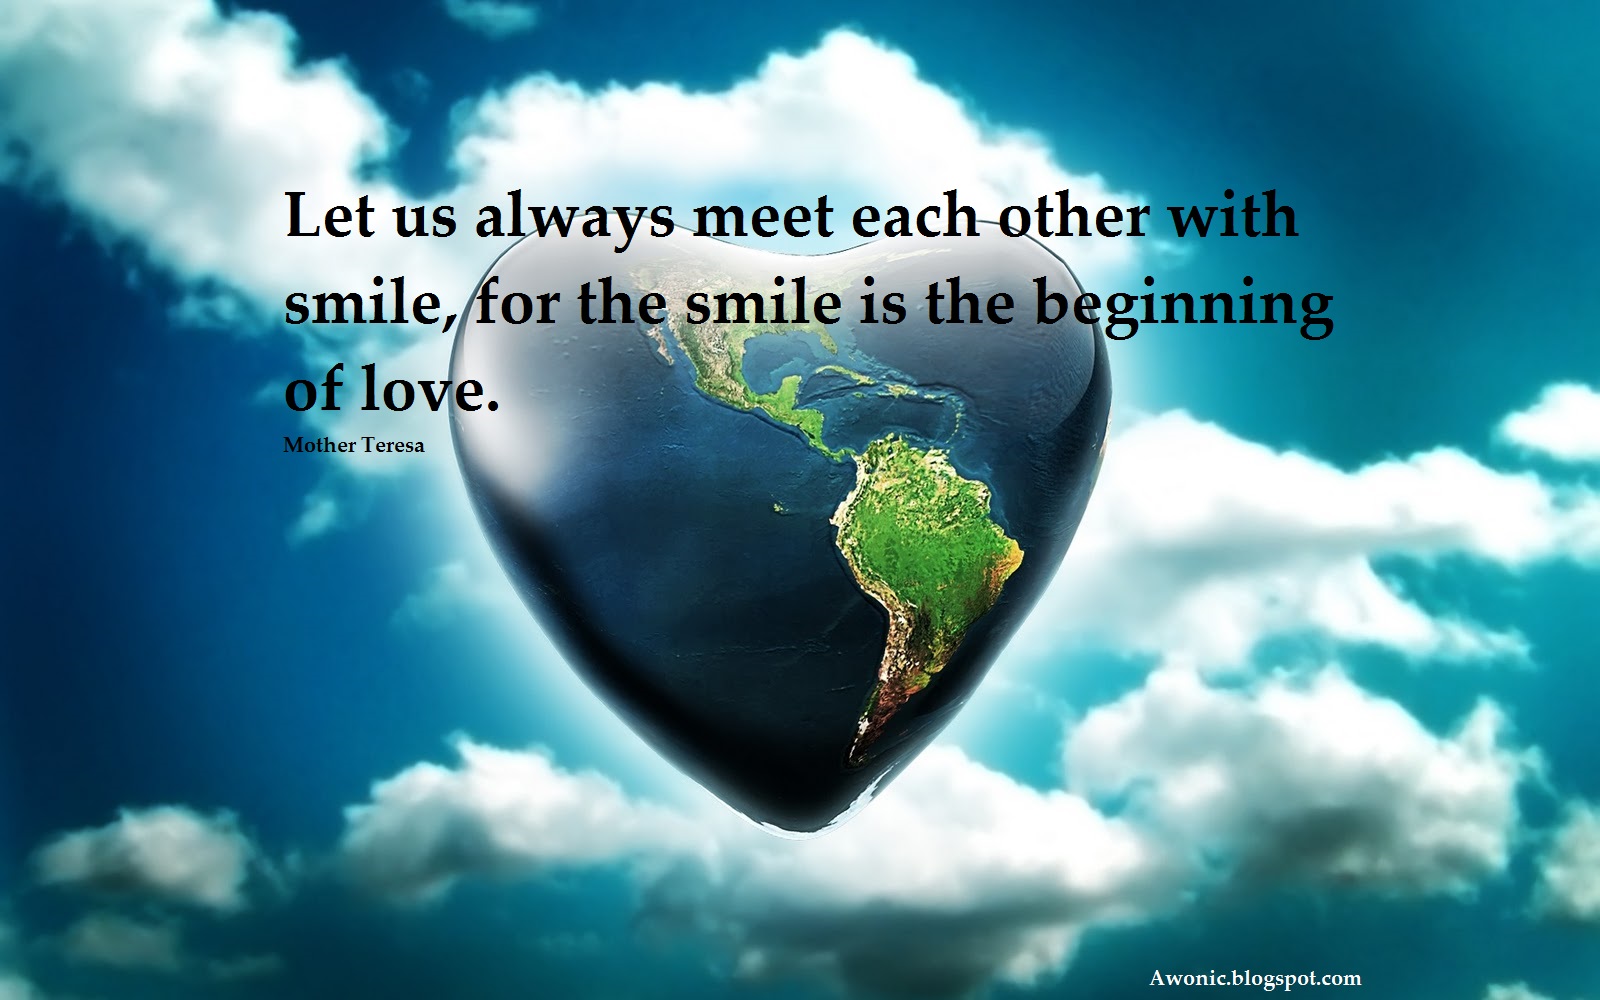 Mother Teresa Iconic Quotes About Relation Between Smile And Love